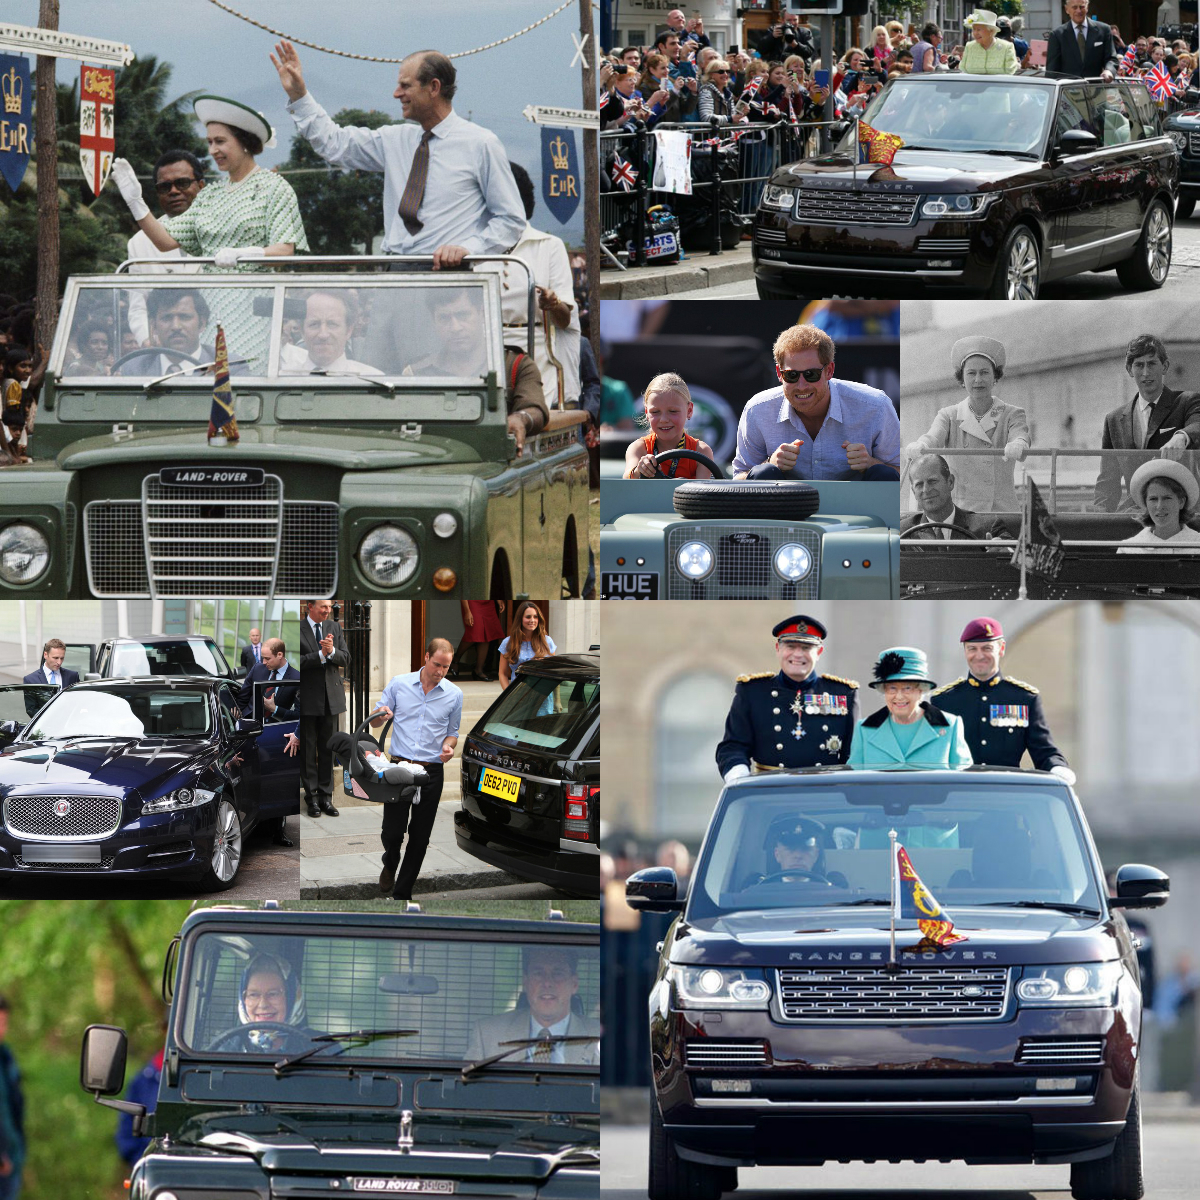 The British Royals do enjoy their vehicles, namely Jaguar and Land Rover.